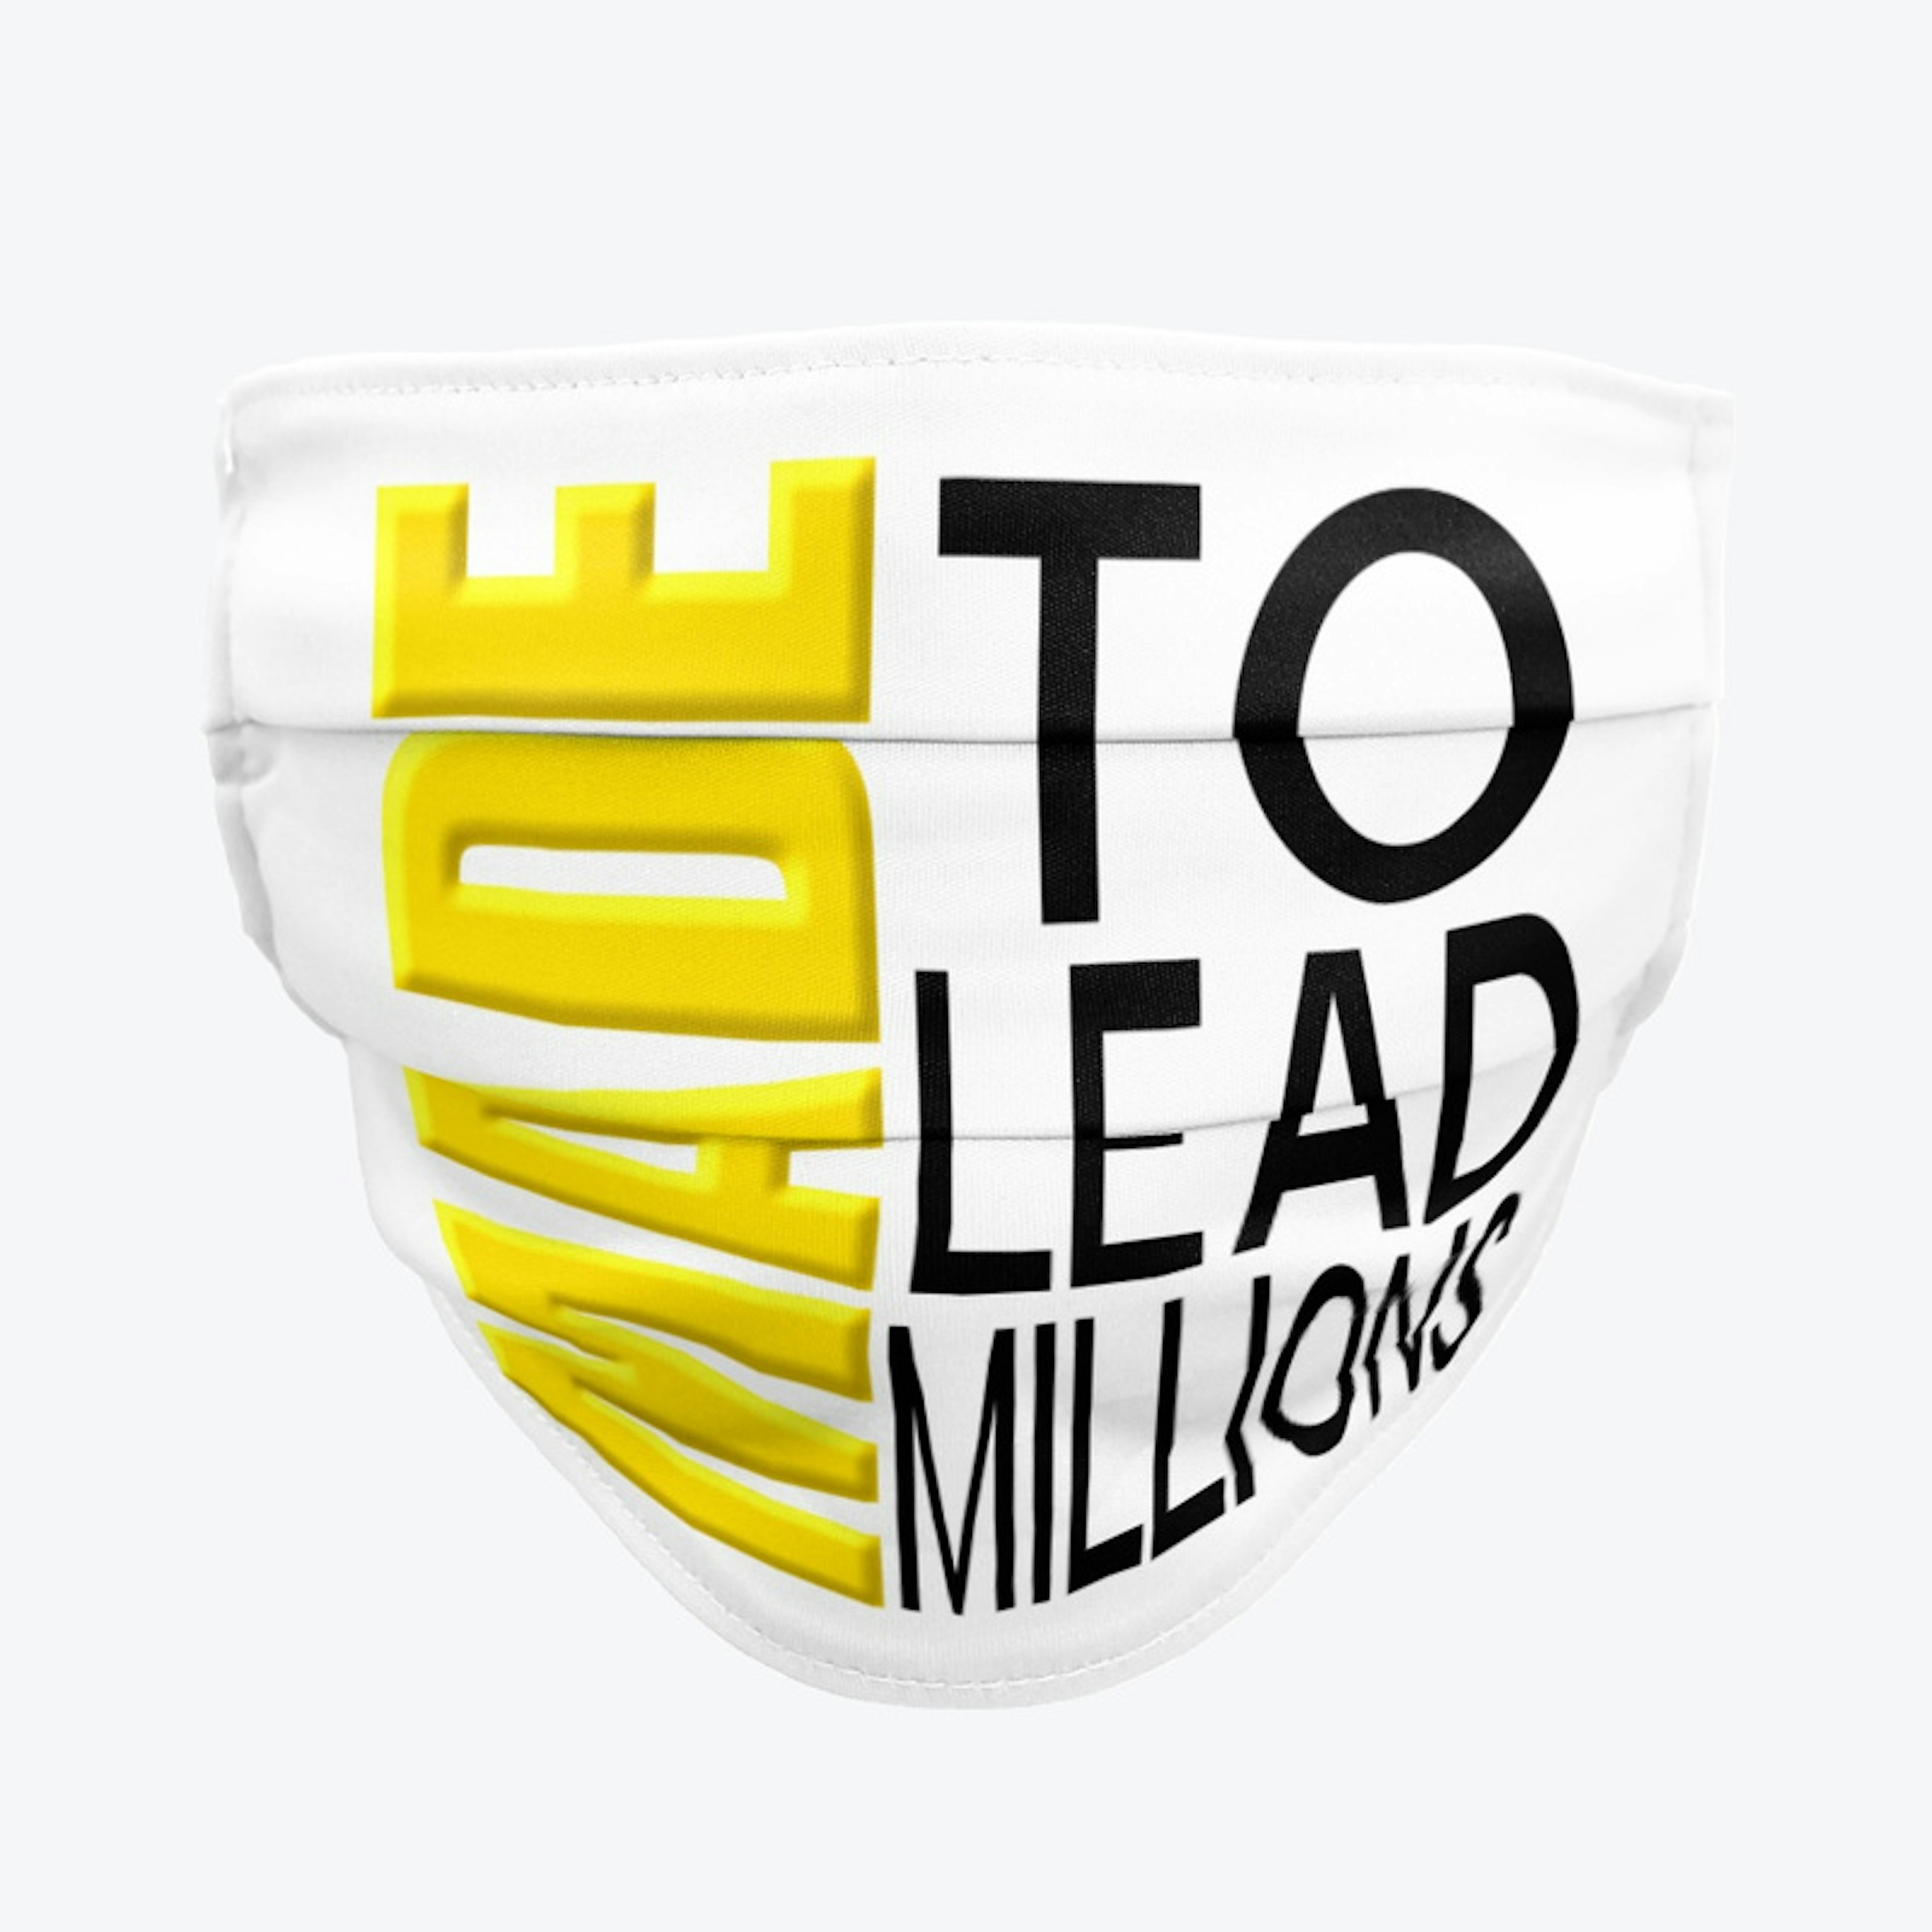 Made to Lead Millions